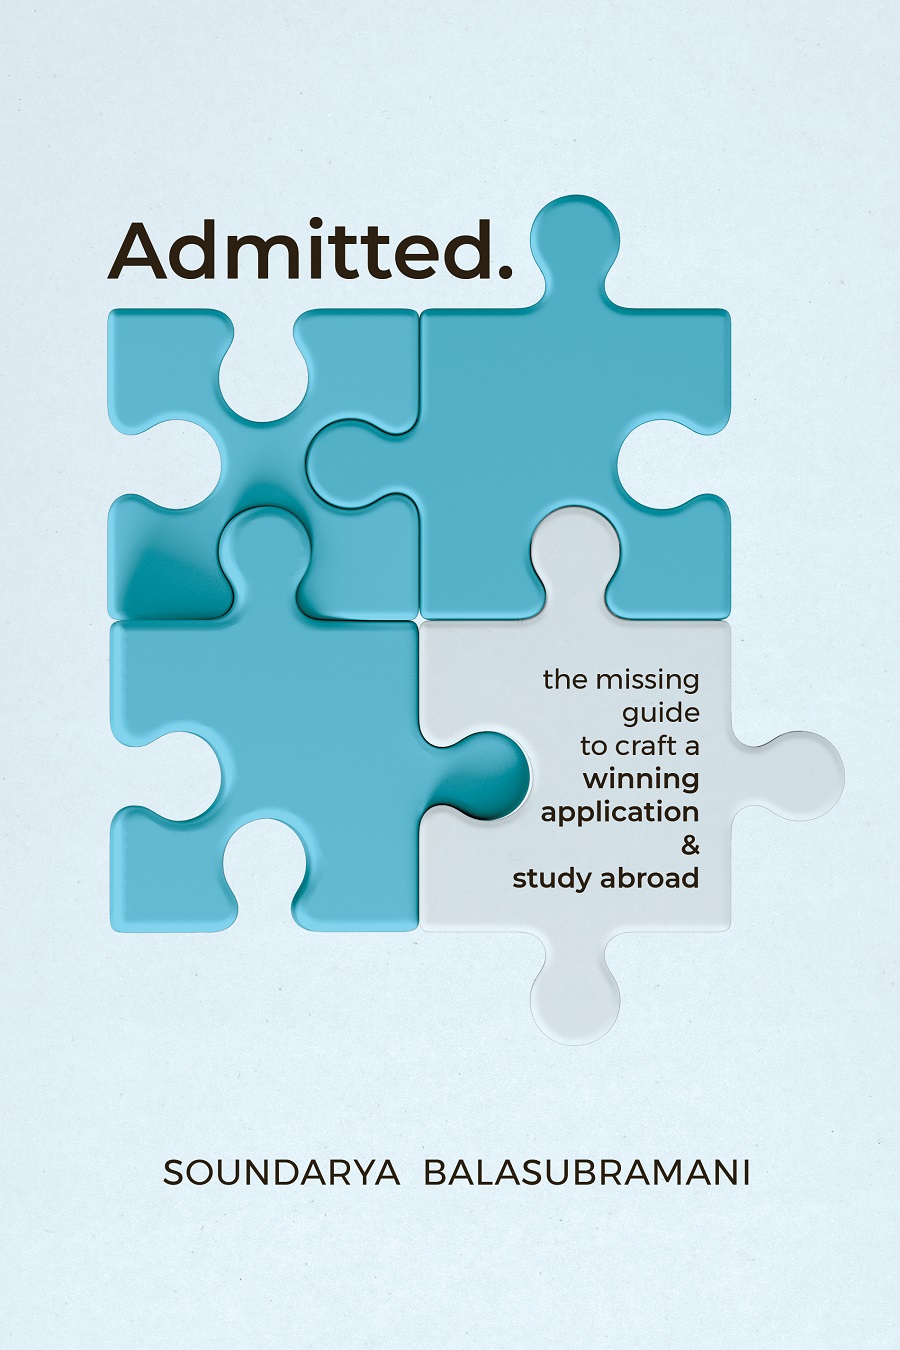 The complex process of admission abroad simplified